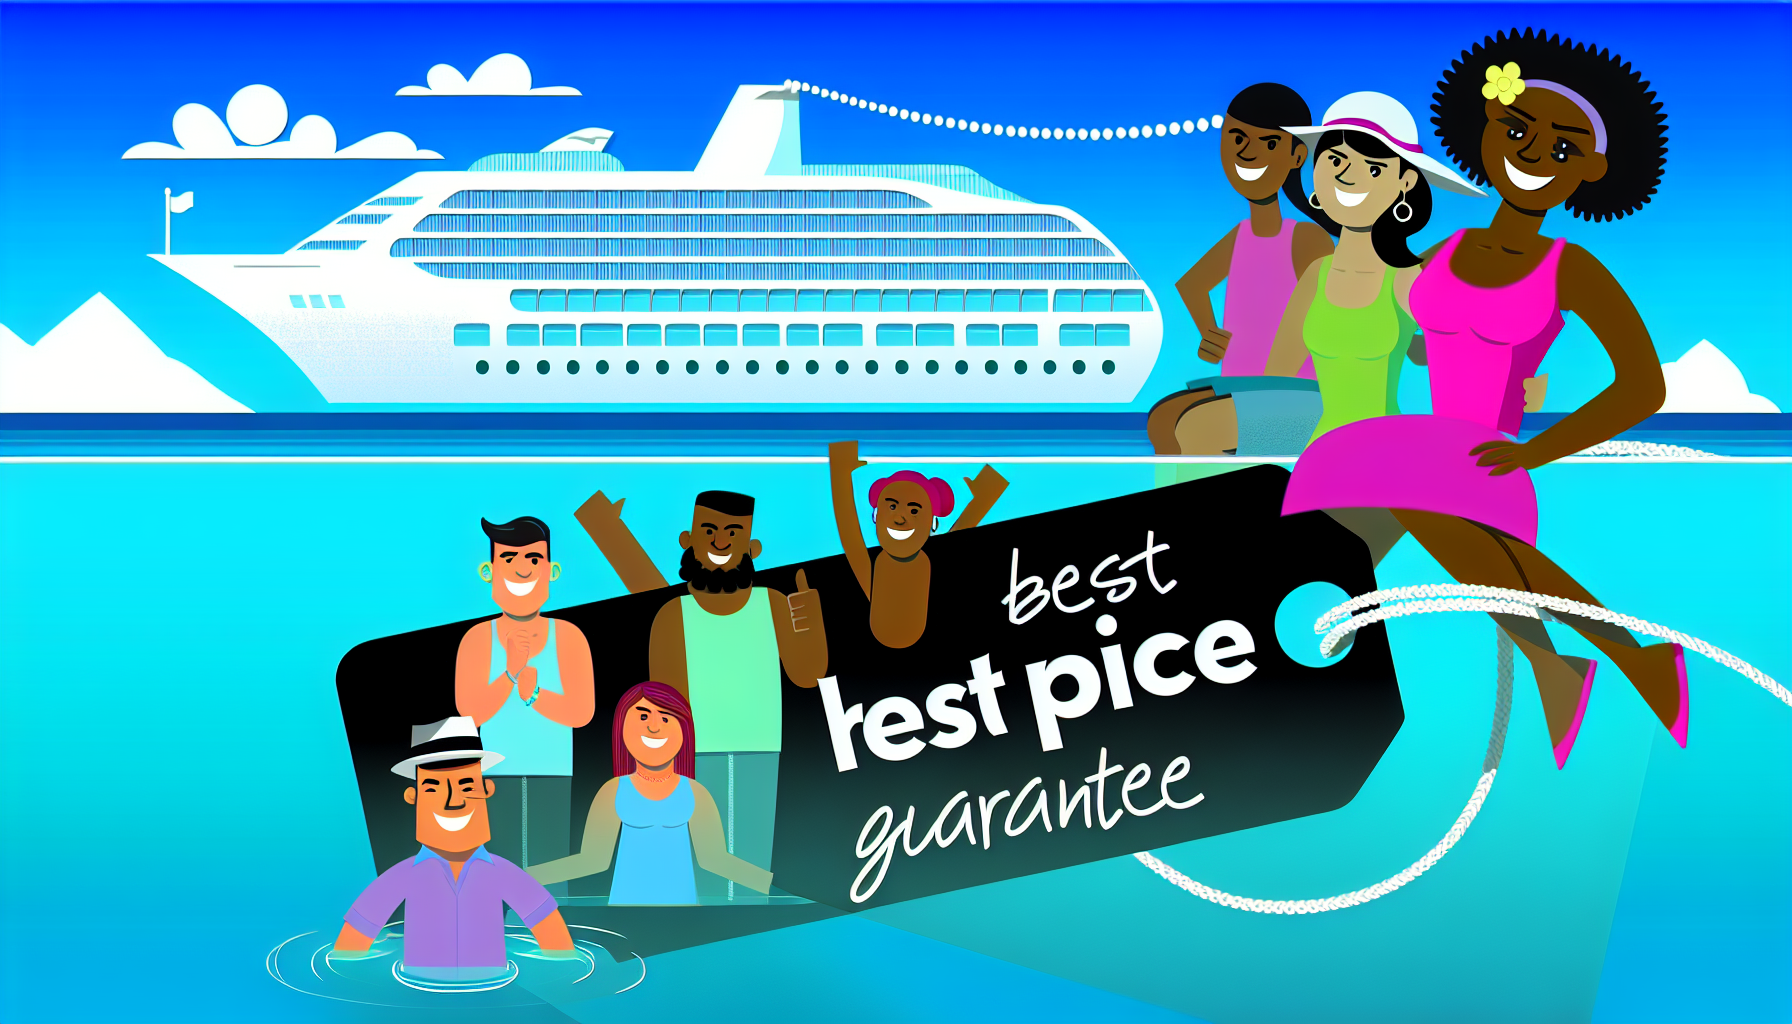 Princess Cruises launches best price guarantee program for affordable cruise adventures